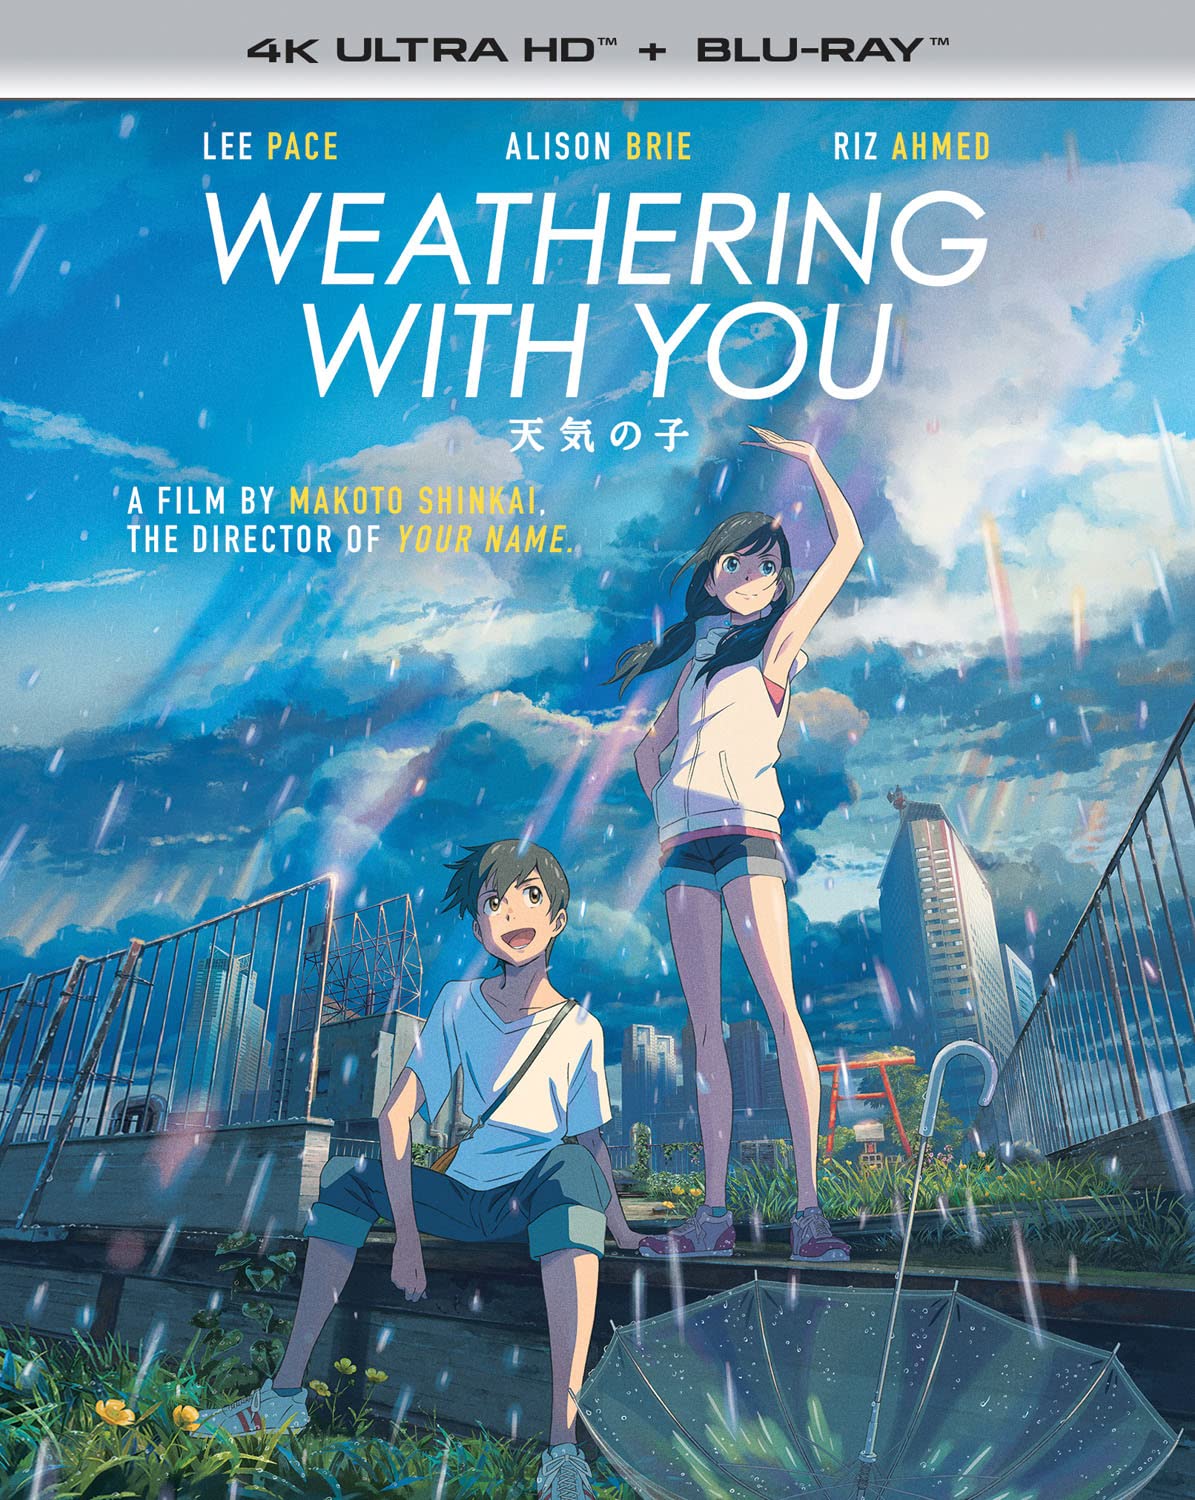 Weathering With You 4k Blu-ray combo